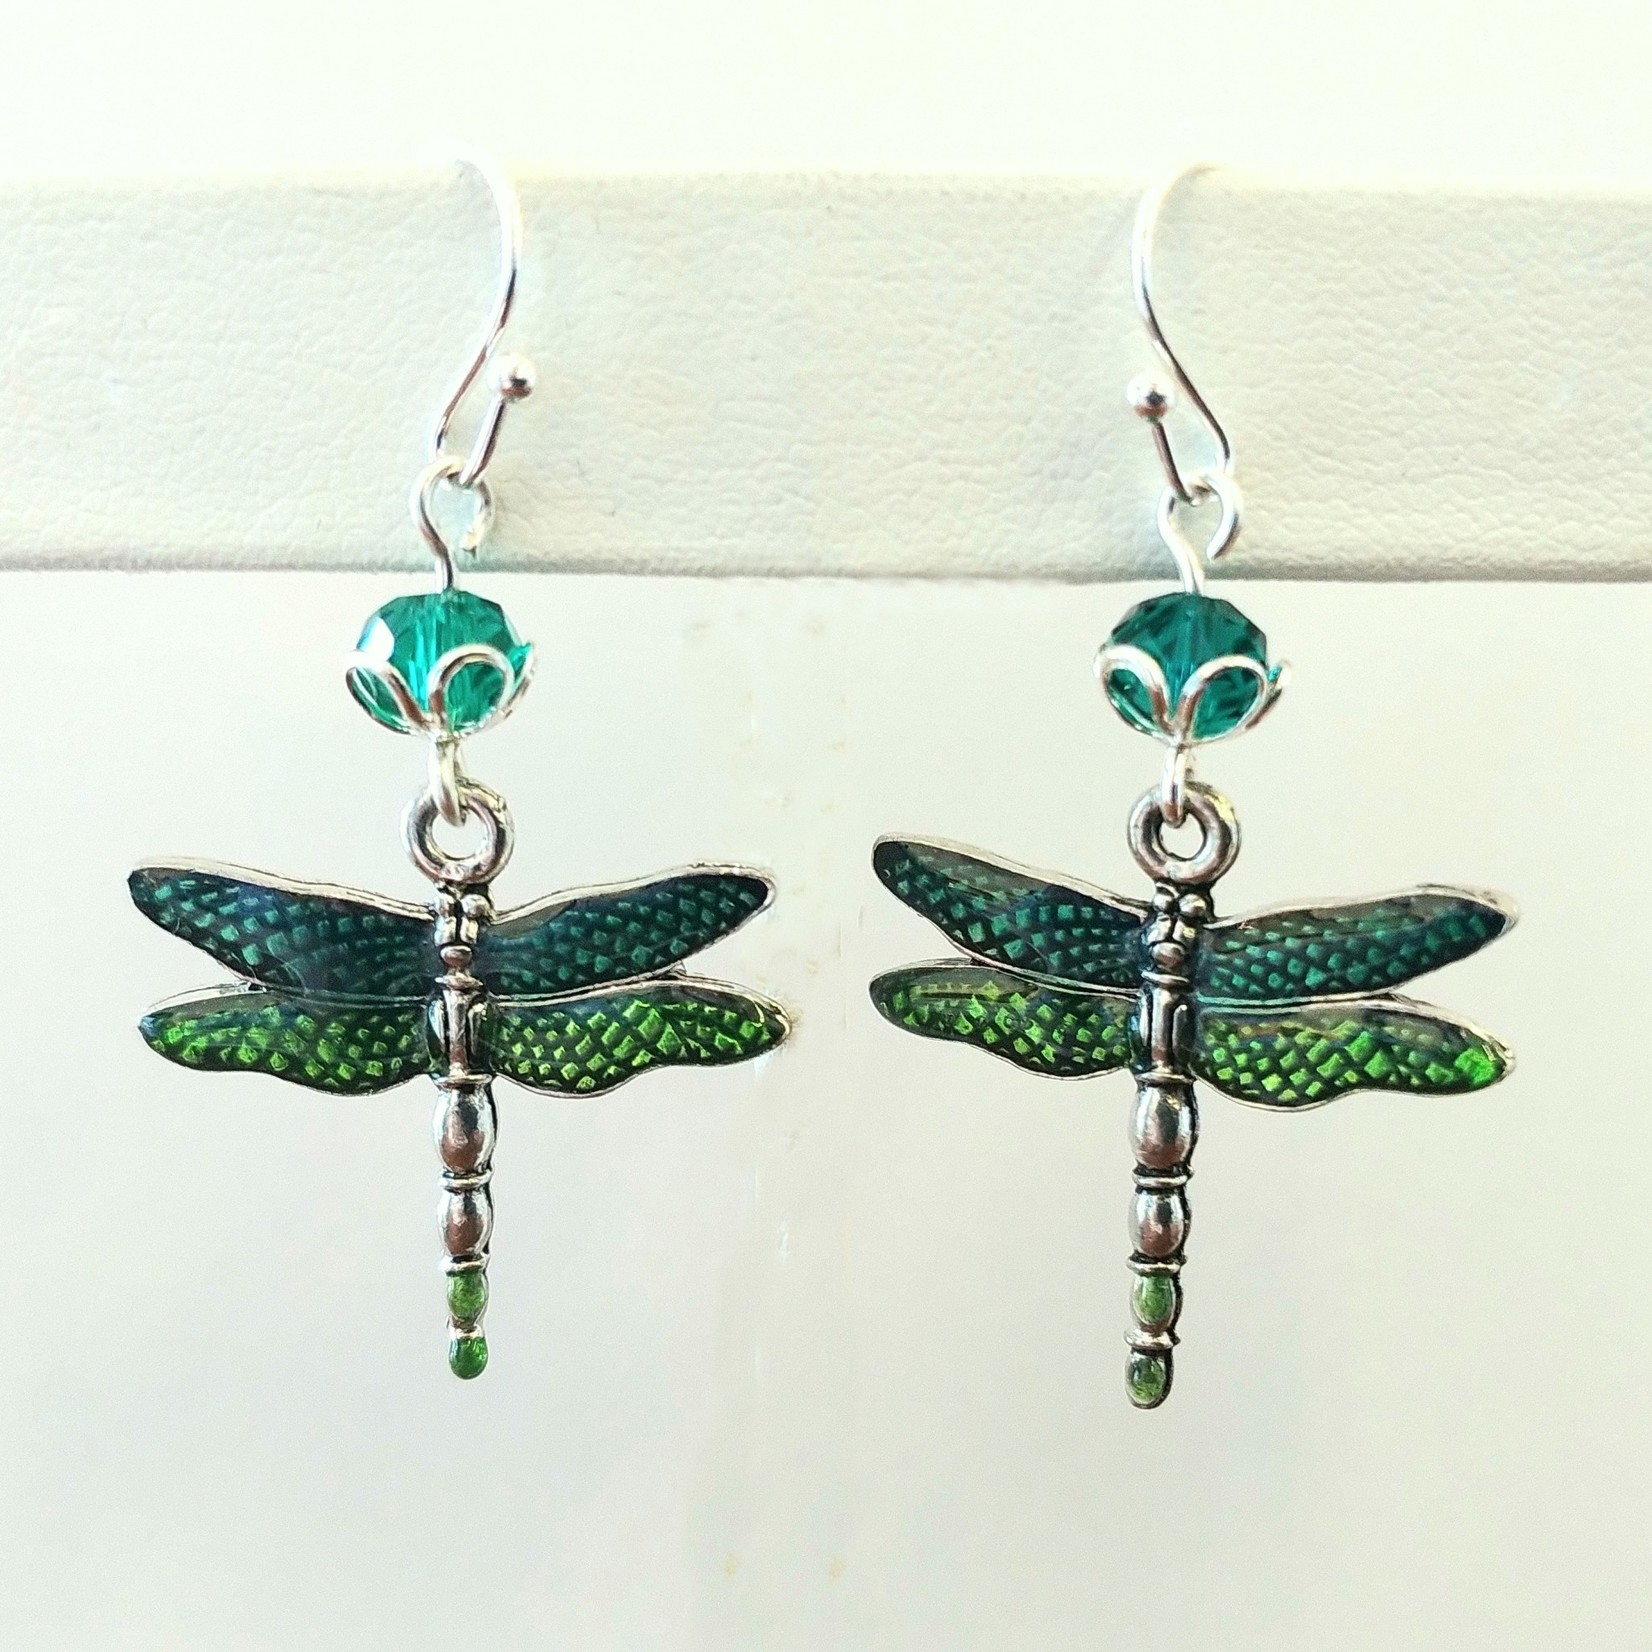 Bead Inspirations Vibrant Dragonfly Teal Earring Kit